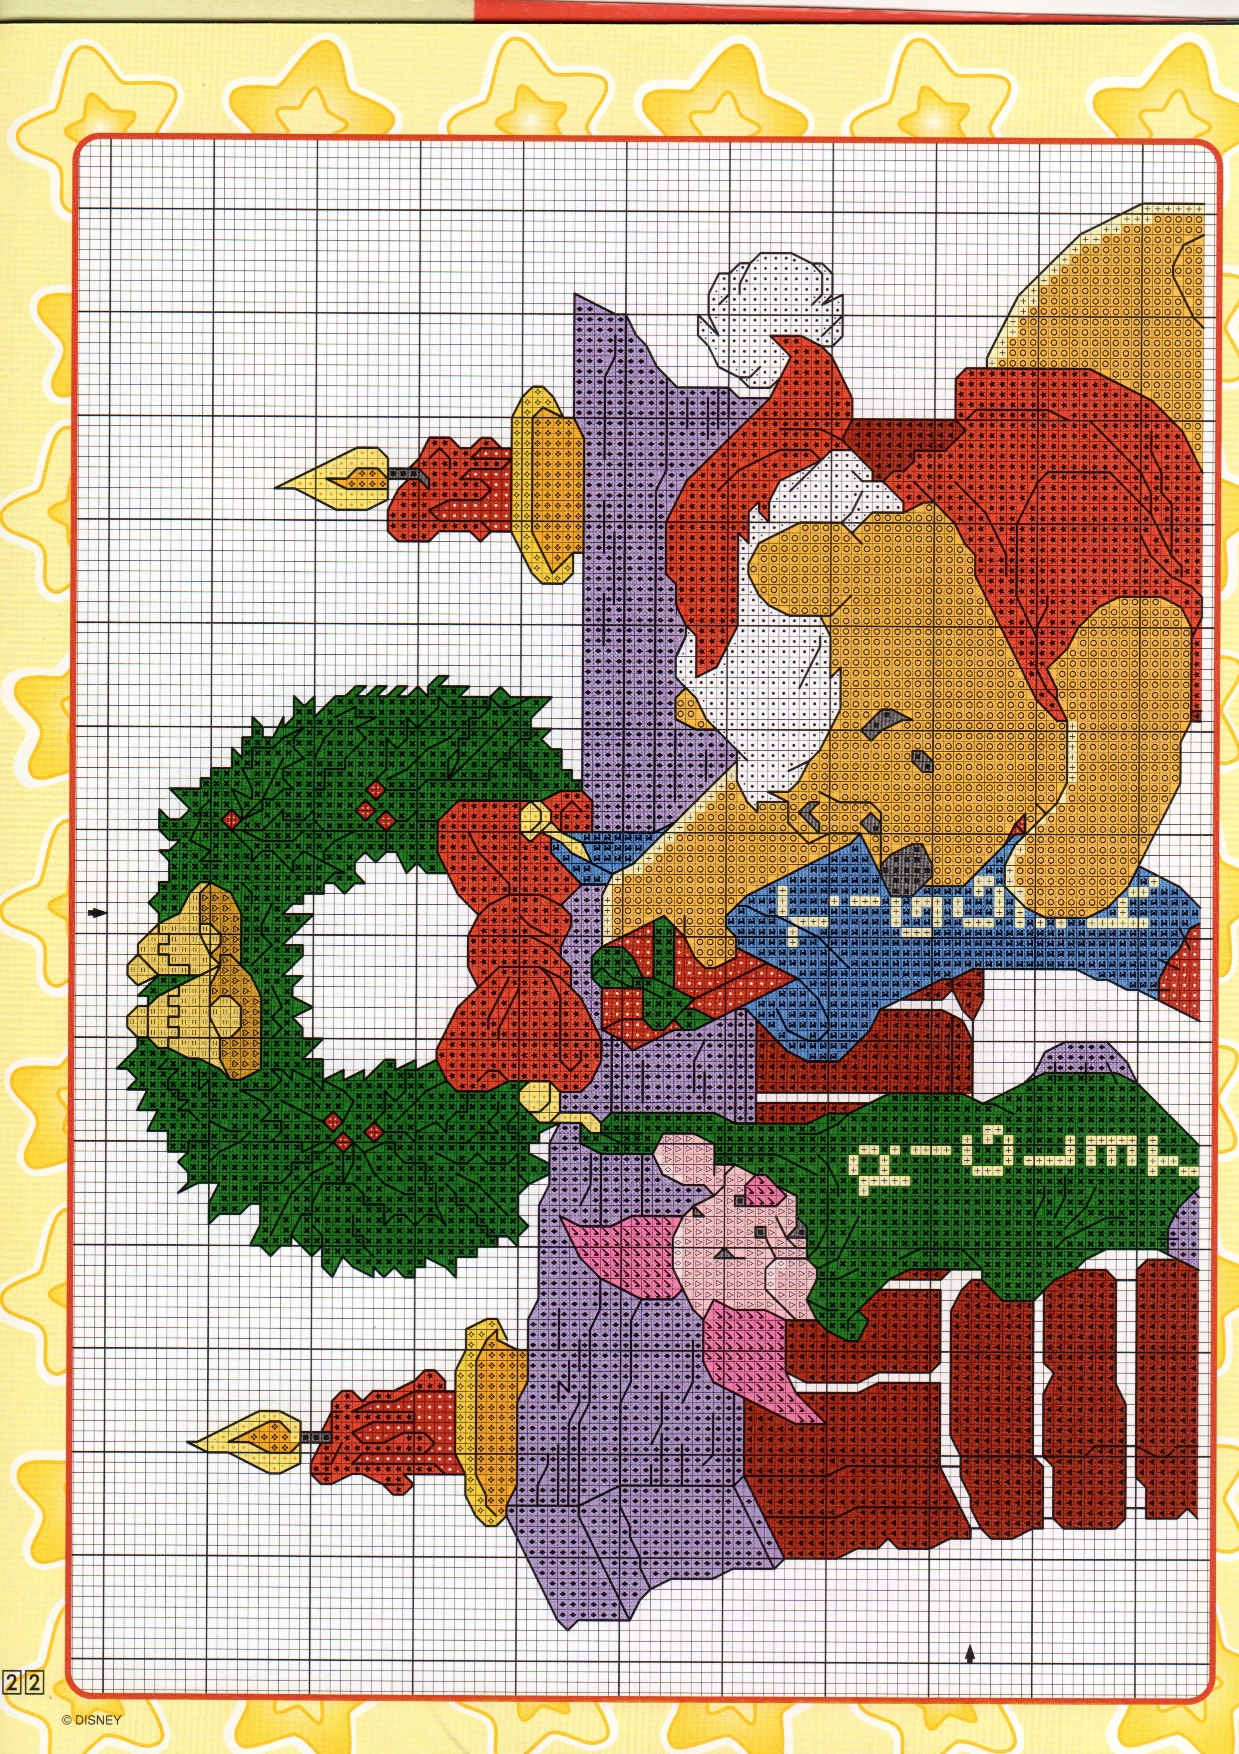 Cross stitch pattern Winnie The Pooh and the fireplace (1)